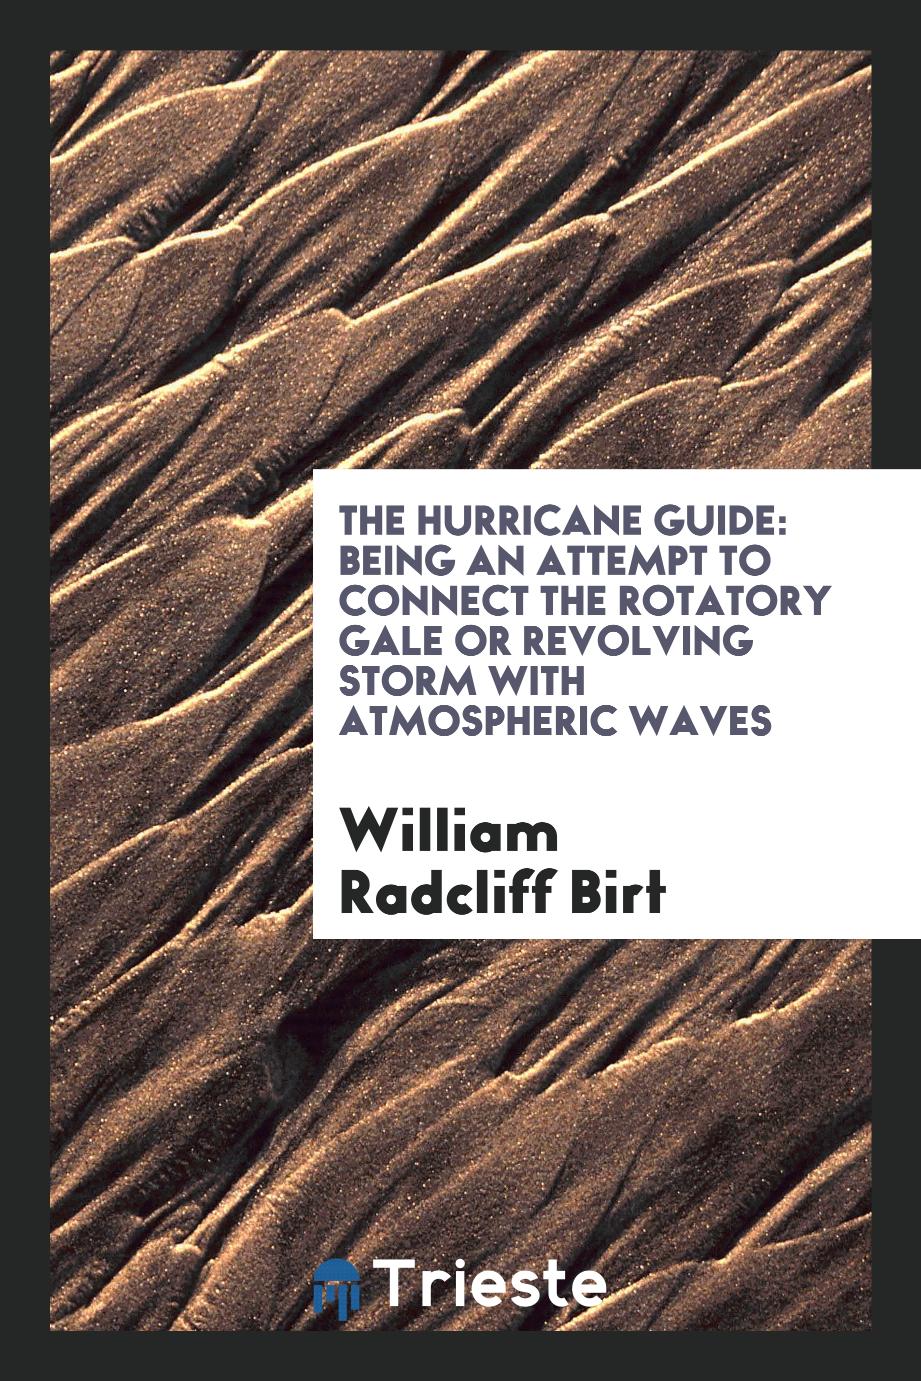 The hurricane guide: Being an Attempt to Connect the Rotatory Gale Or Revolving Storm with Atmospheric Waves